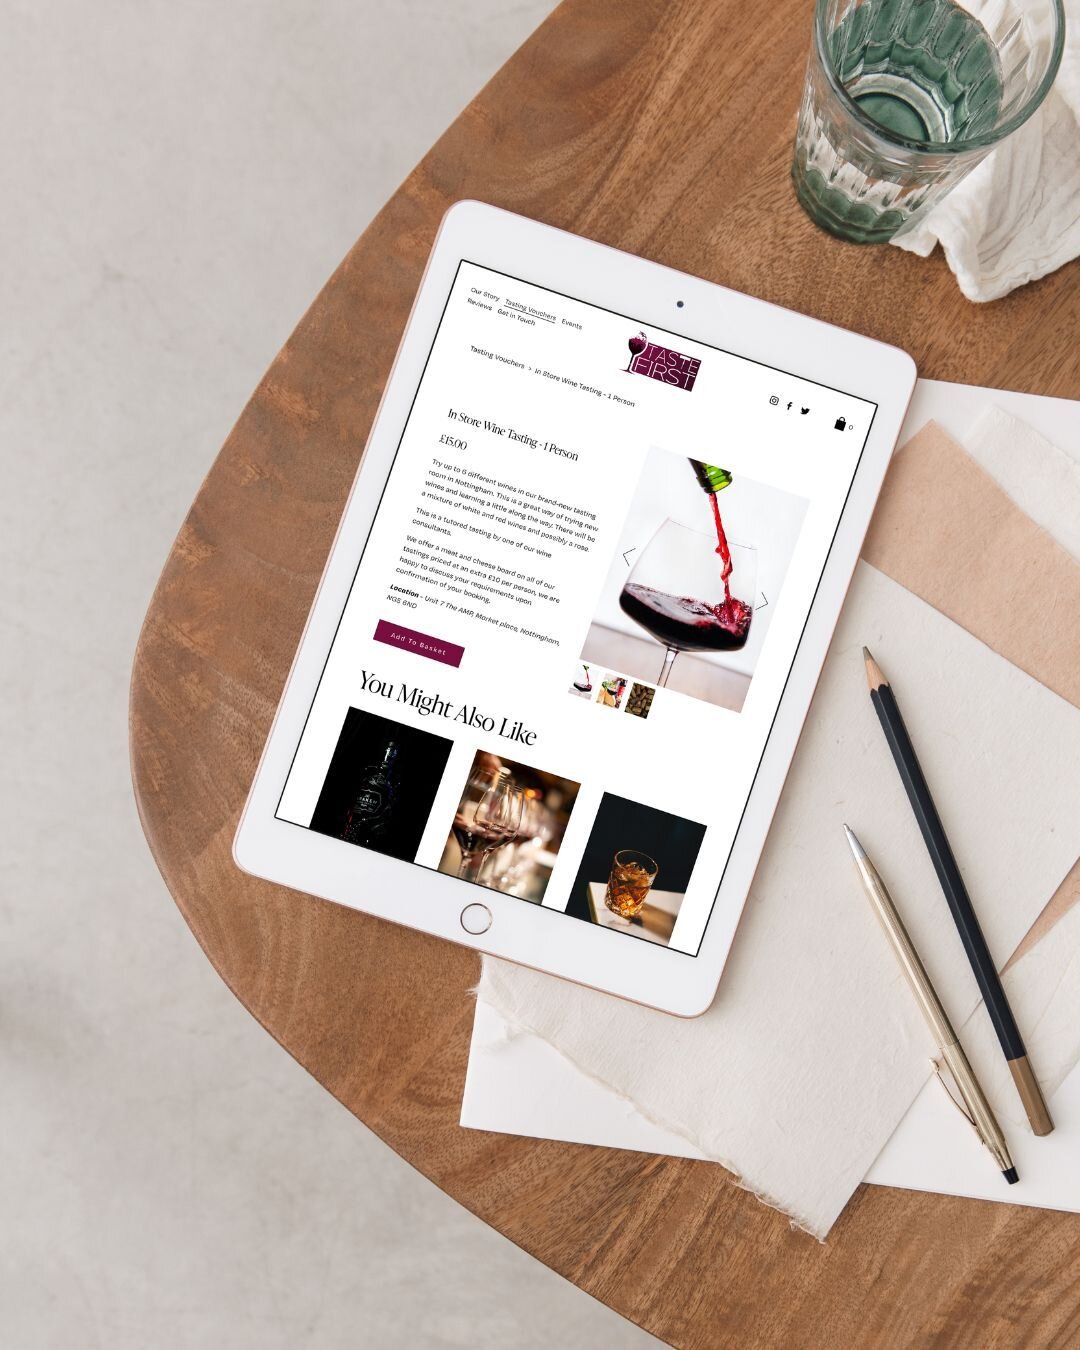 Transforming online shopping, one website at a time 💻🛍️ Let&rsquo;s create an e-commerce platform that drives sales for your business. 

Here is an e-commerce website we built and designed for @tastefirstuk 

#digitalmarketing #ecommercewebsite  #e